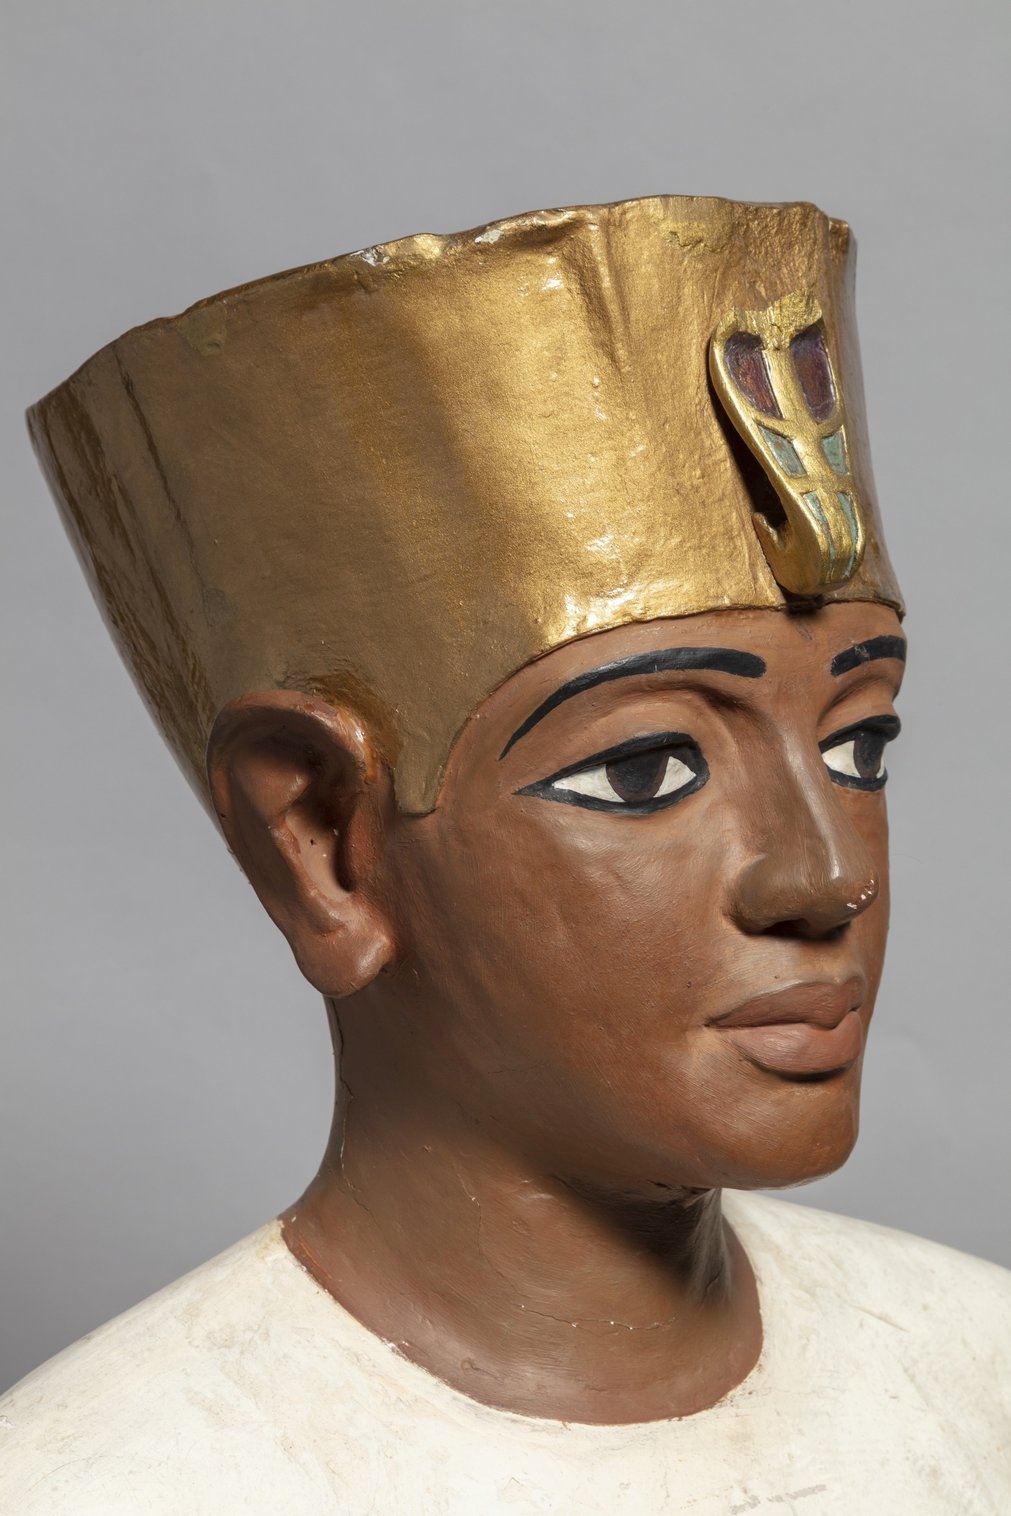 Ancient Egypt will arrive at Ferens Art Gallery with major exhibition